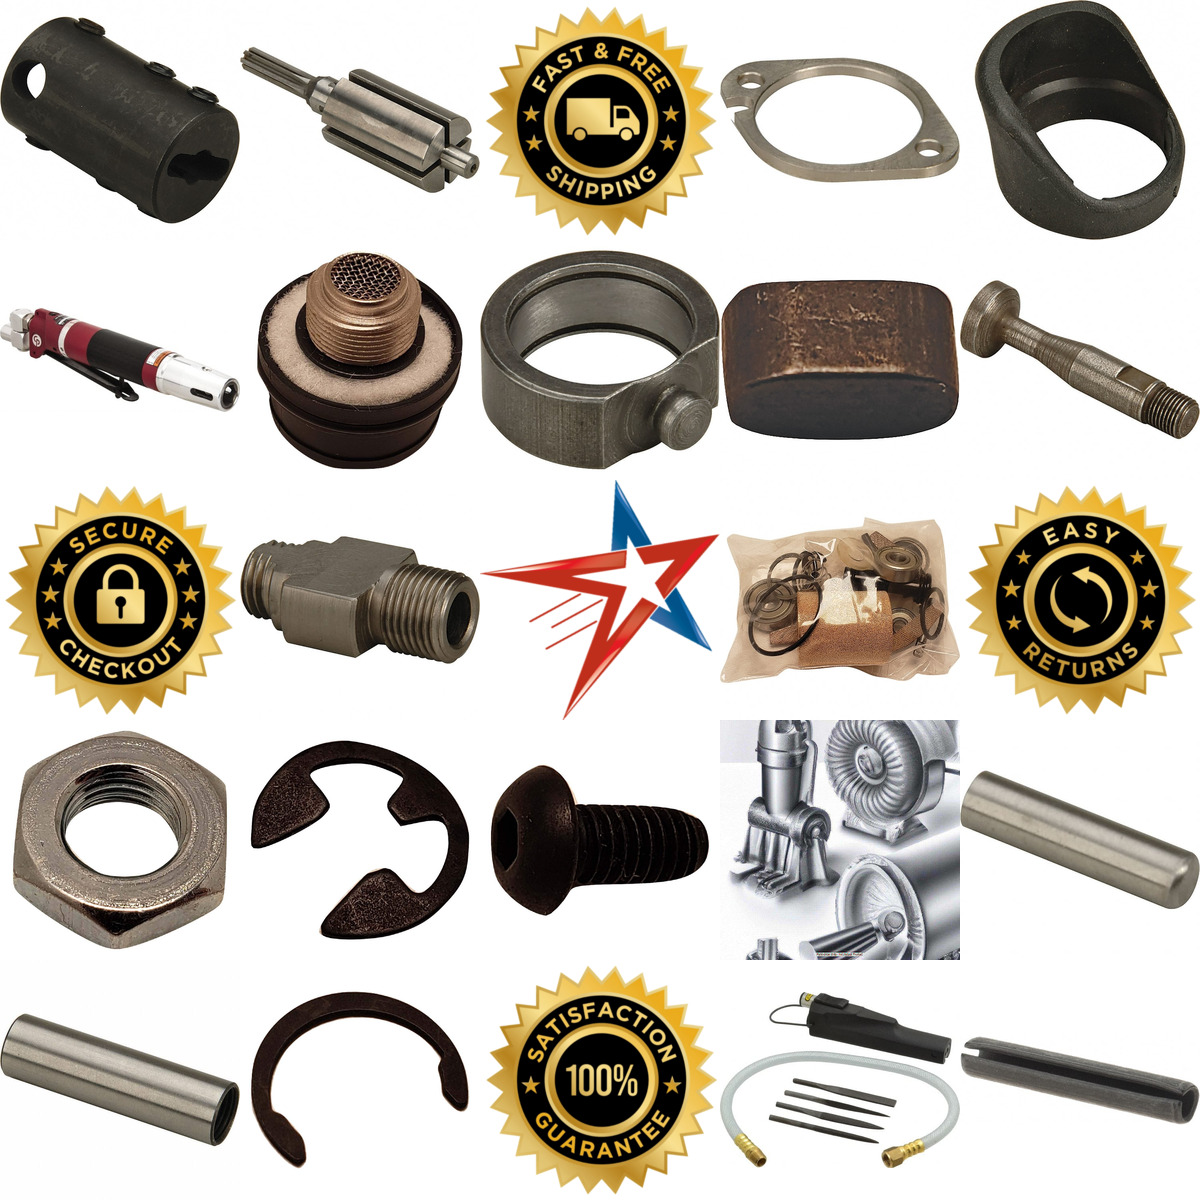 A selection of Air Files and Accessories products on GoVets